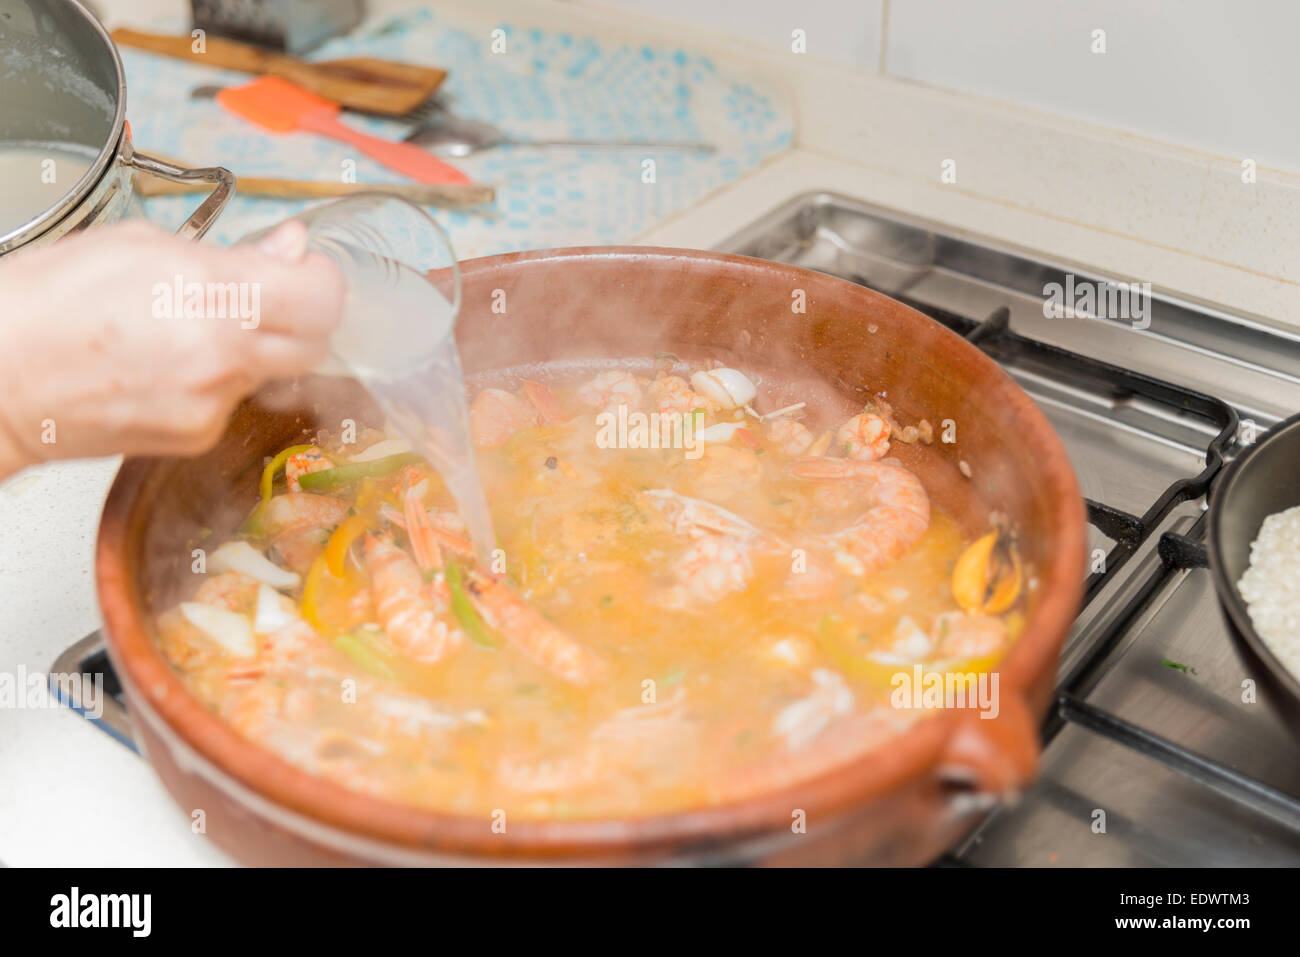 Valencian paella cooked seafood and rice Stock Photo